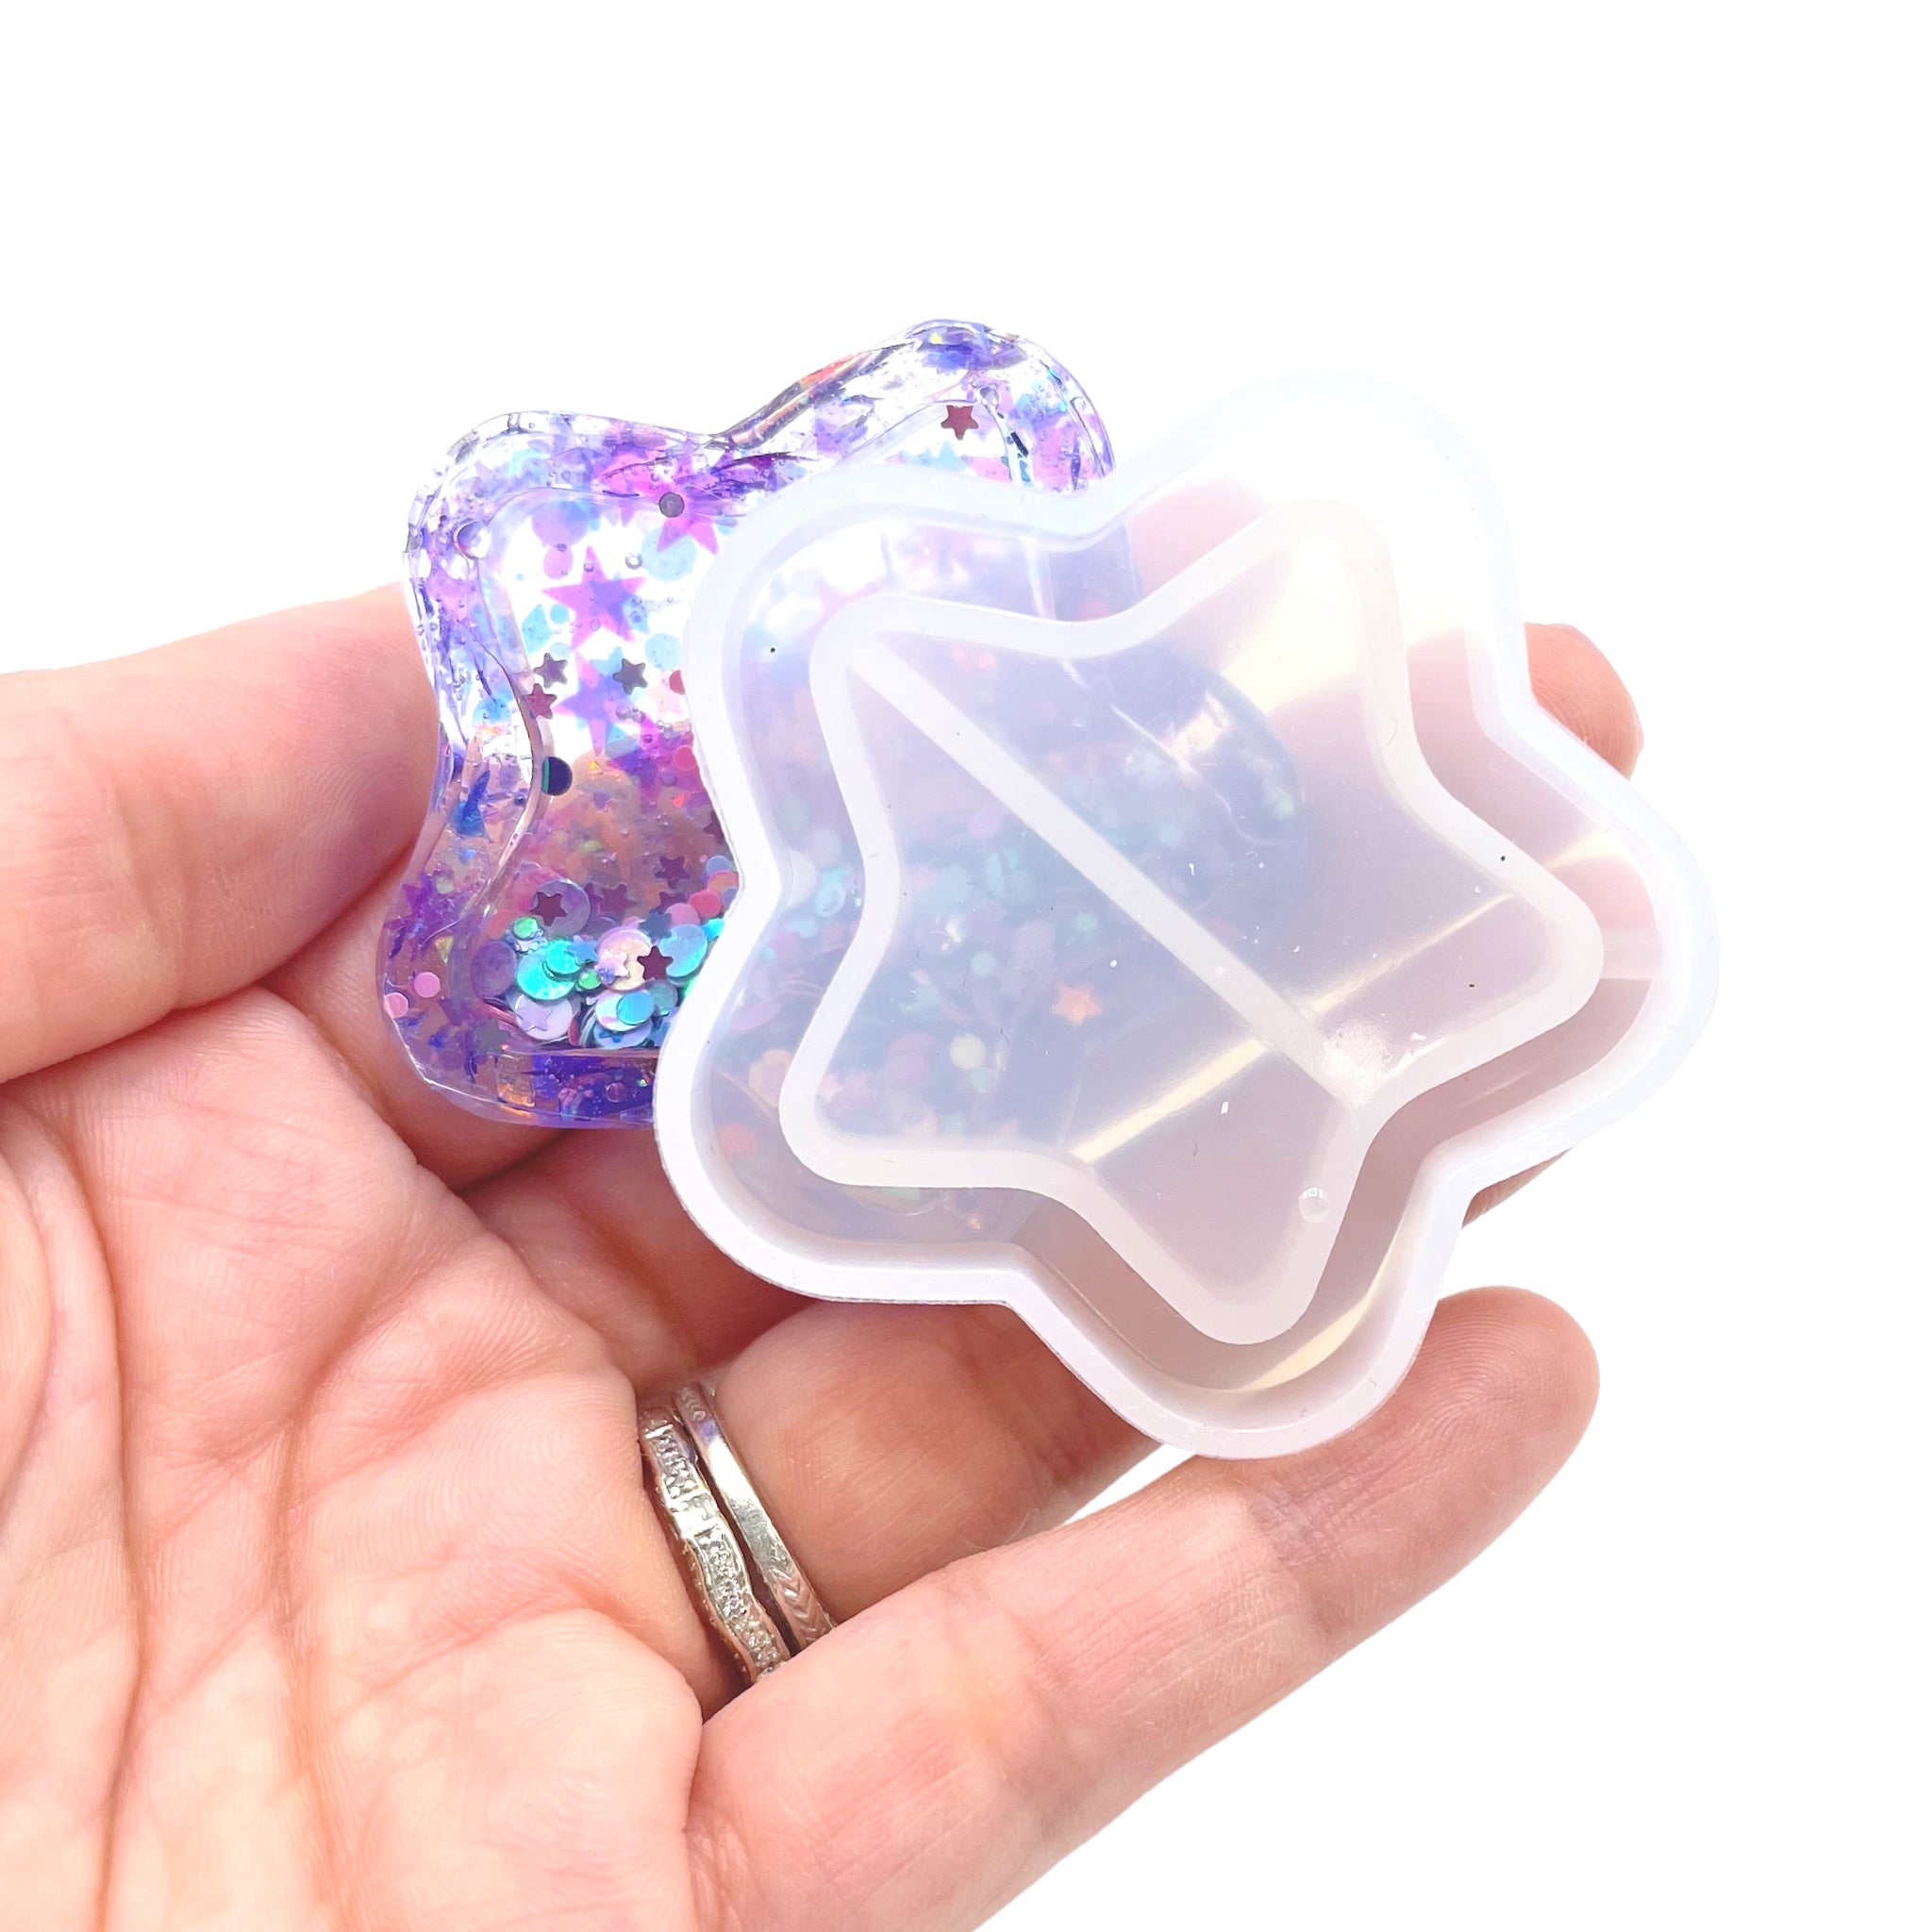 Kitty Ears Silicone Ring Mold, Kawaii Ring Mould